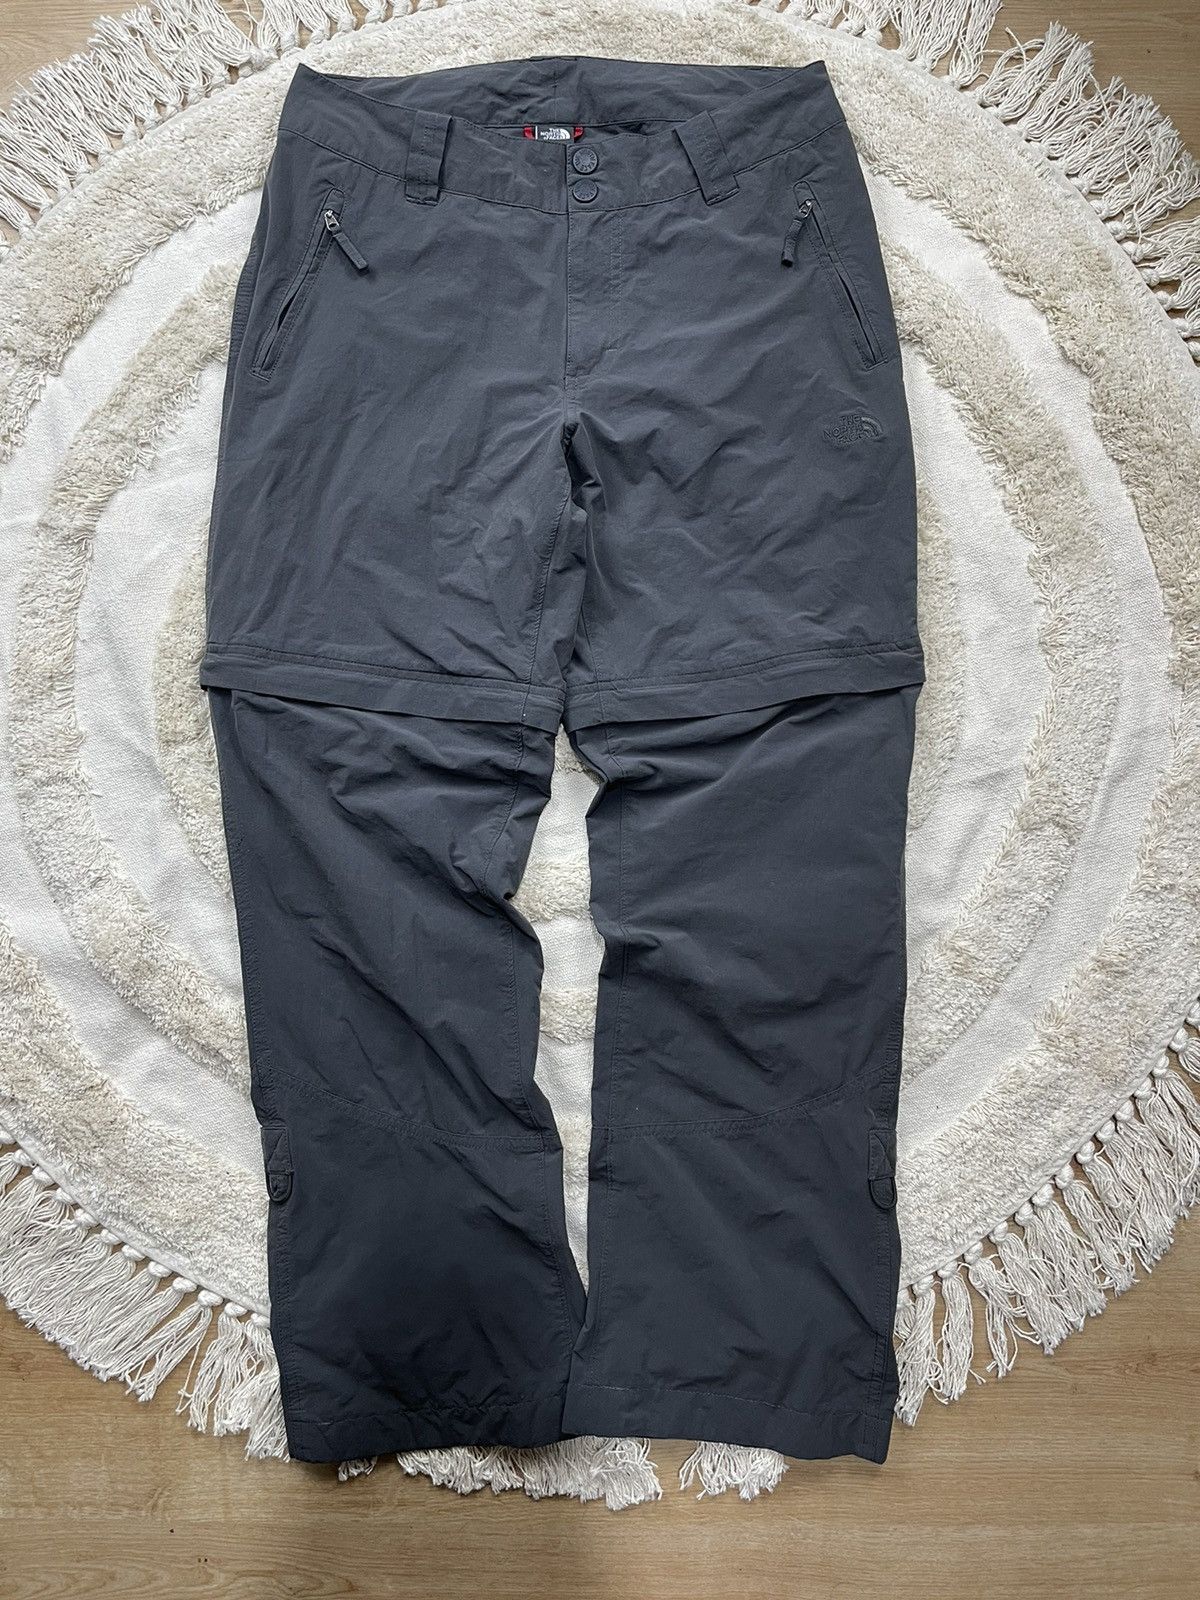 The North Face THE NORTH FACE 2in1 GORECOPE PANTS RARE | Grailed